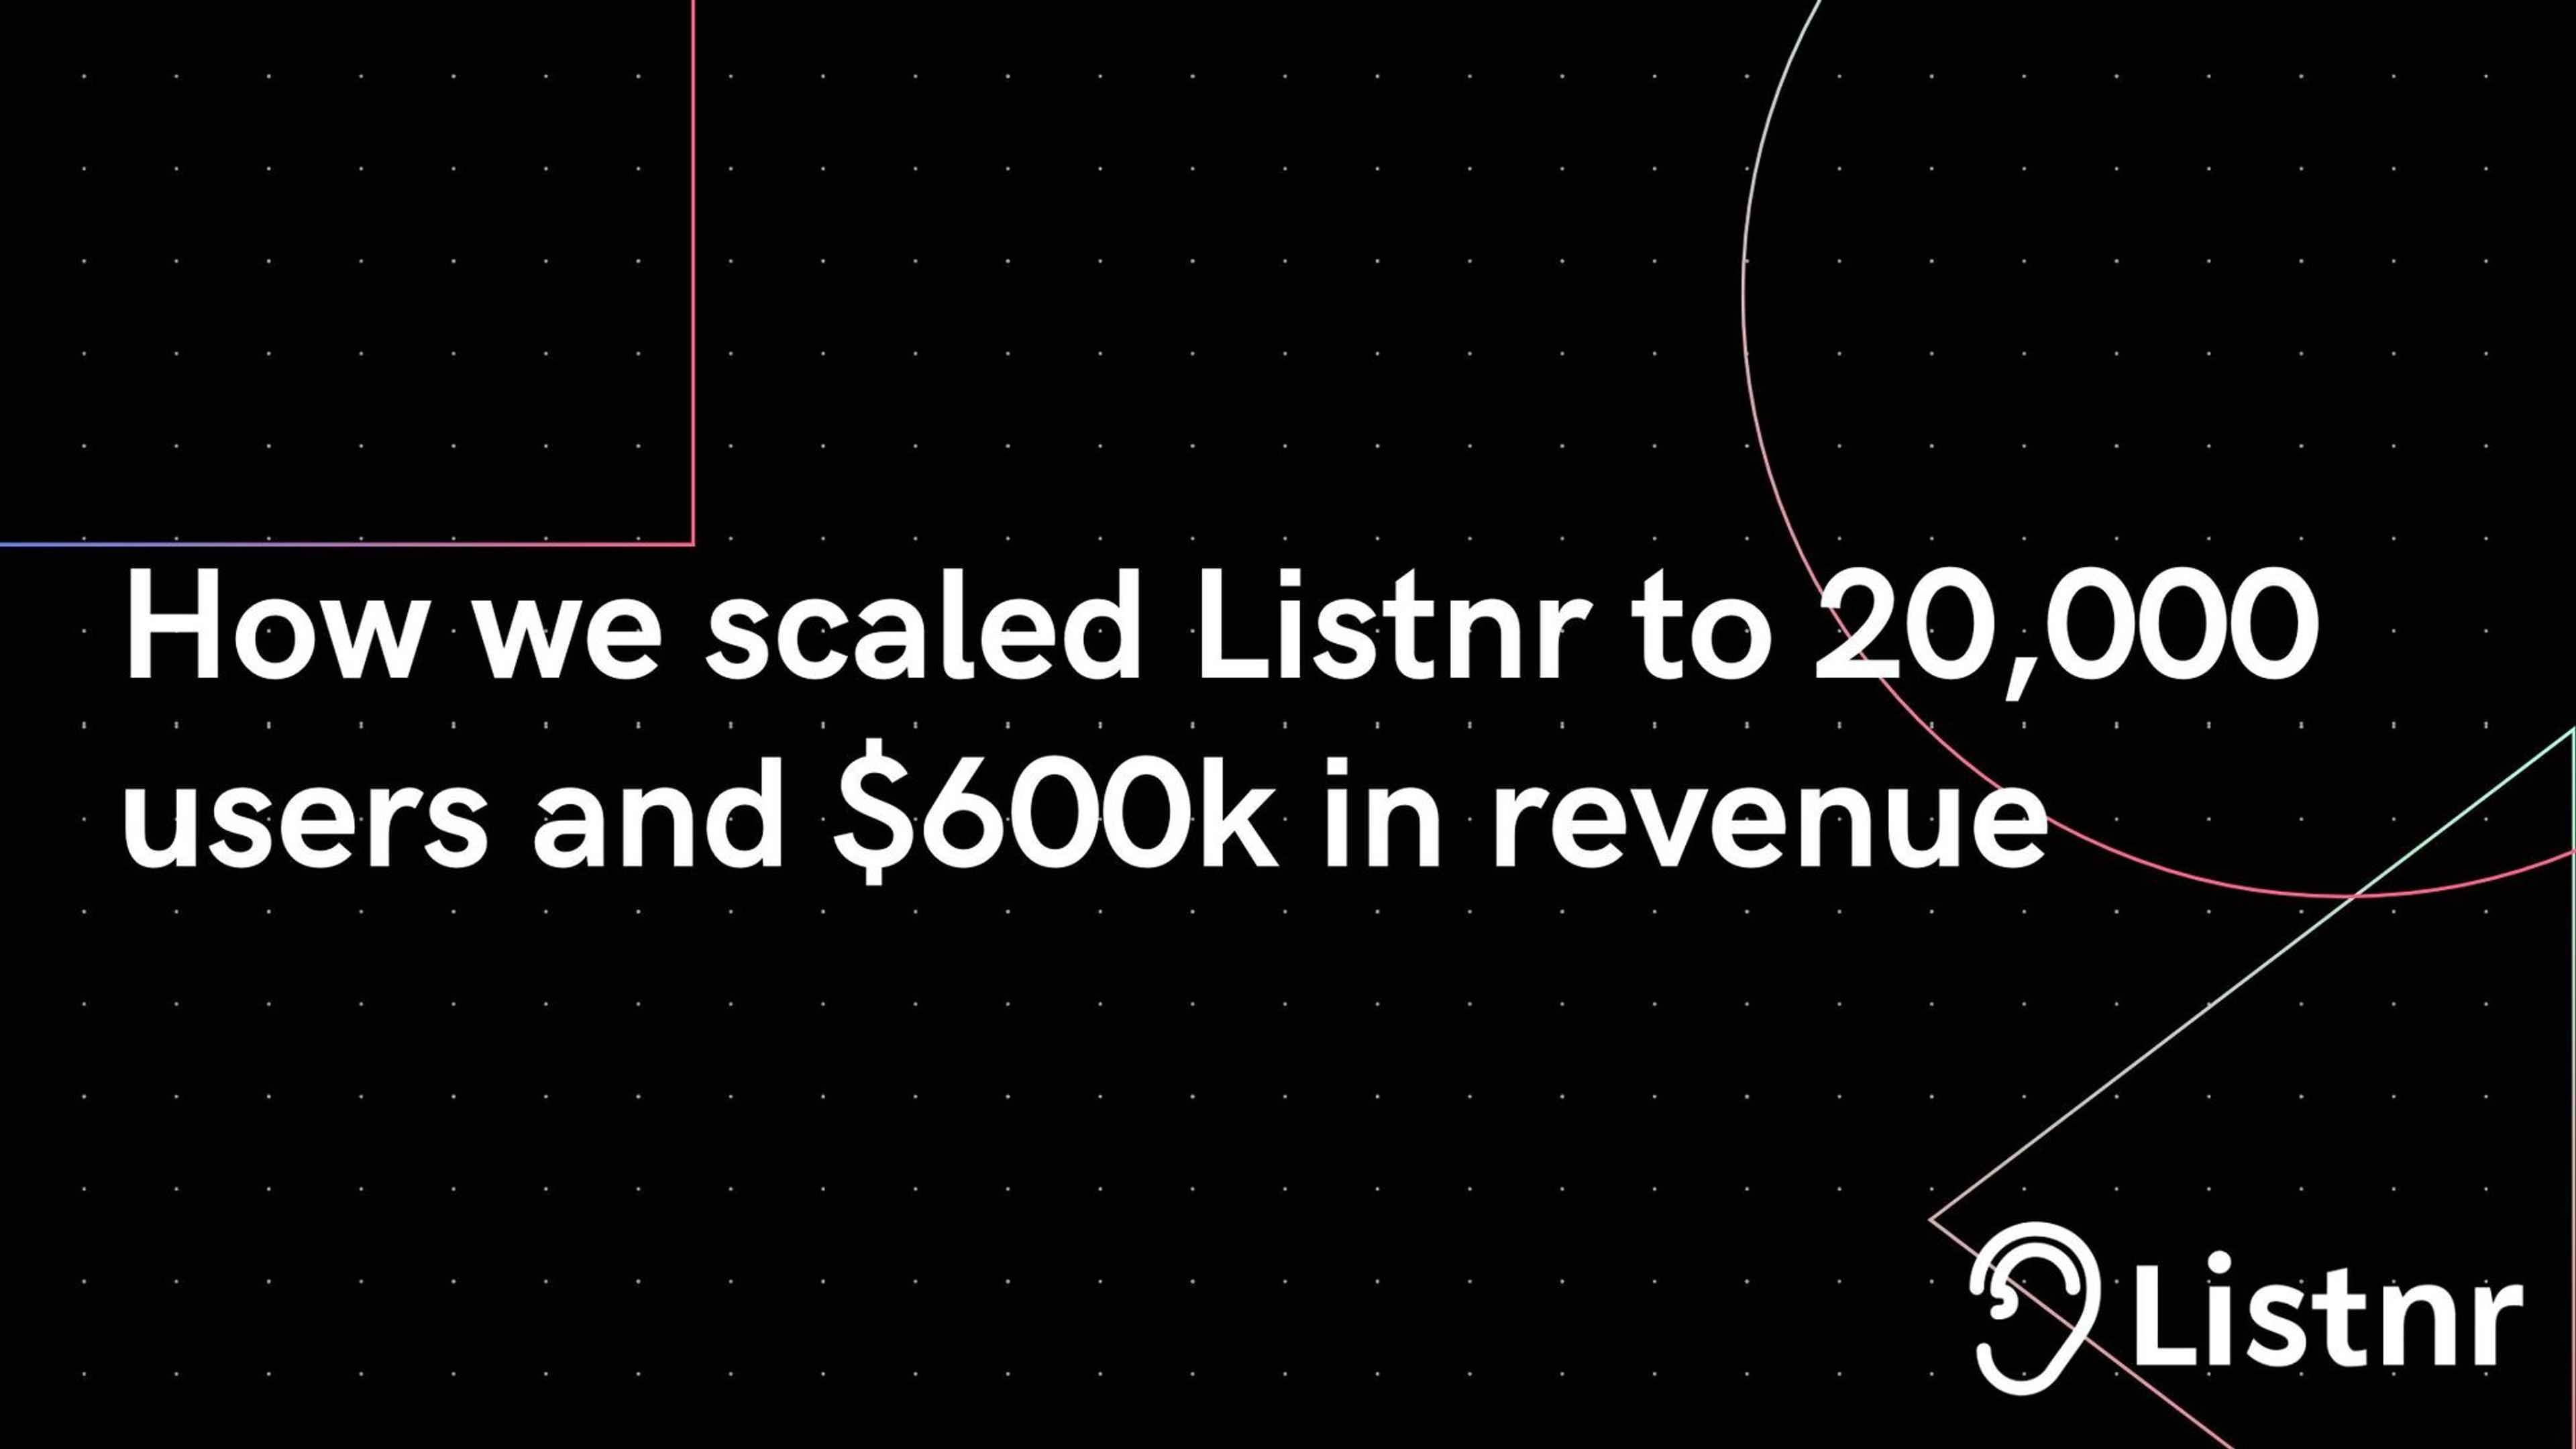 Scaling Listnr to 20,000 users and $600k in revenue